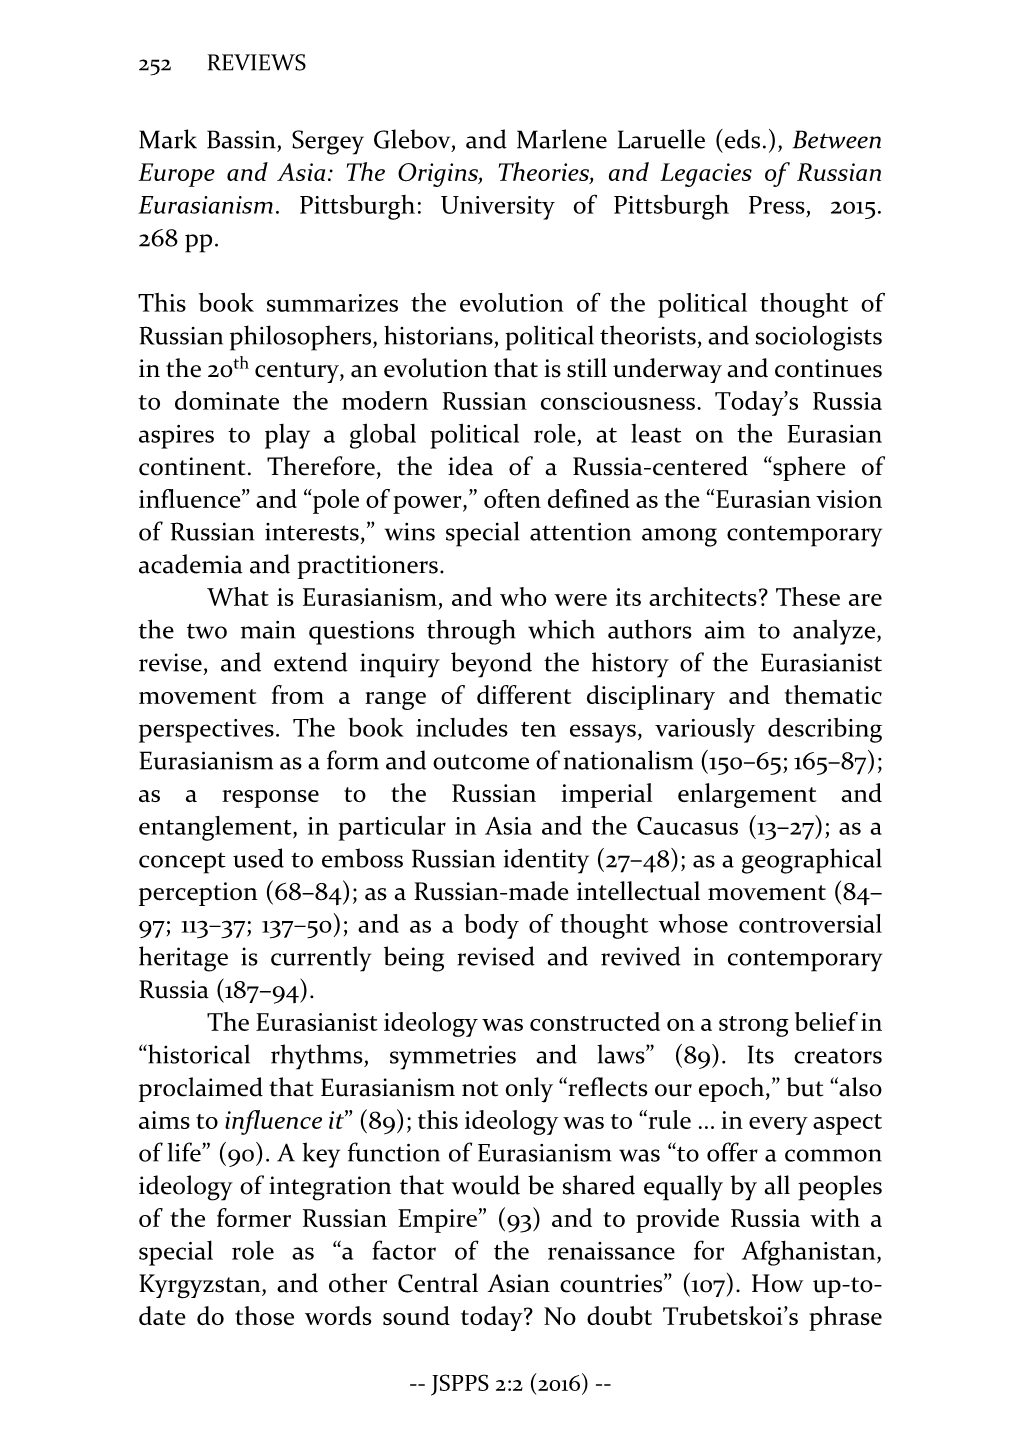 Mark Bassin, Sergey Glebov, and Marlene Laruelle (Eds.), Between Europe and Asia: the Origins, Theories, and Legacies of Russian Eurasianism